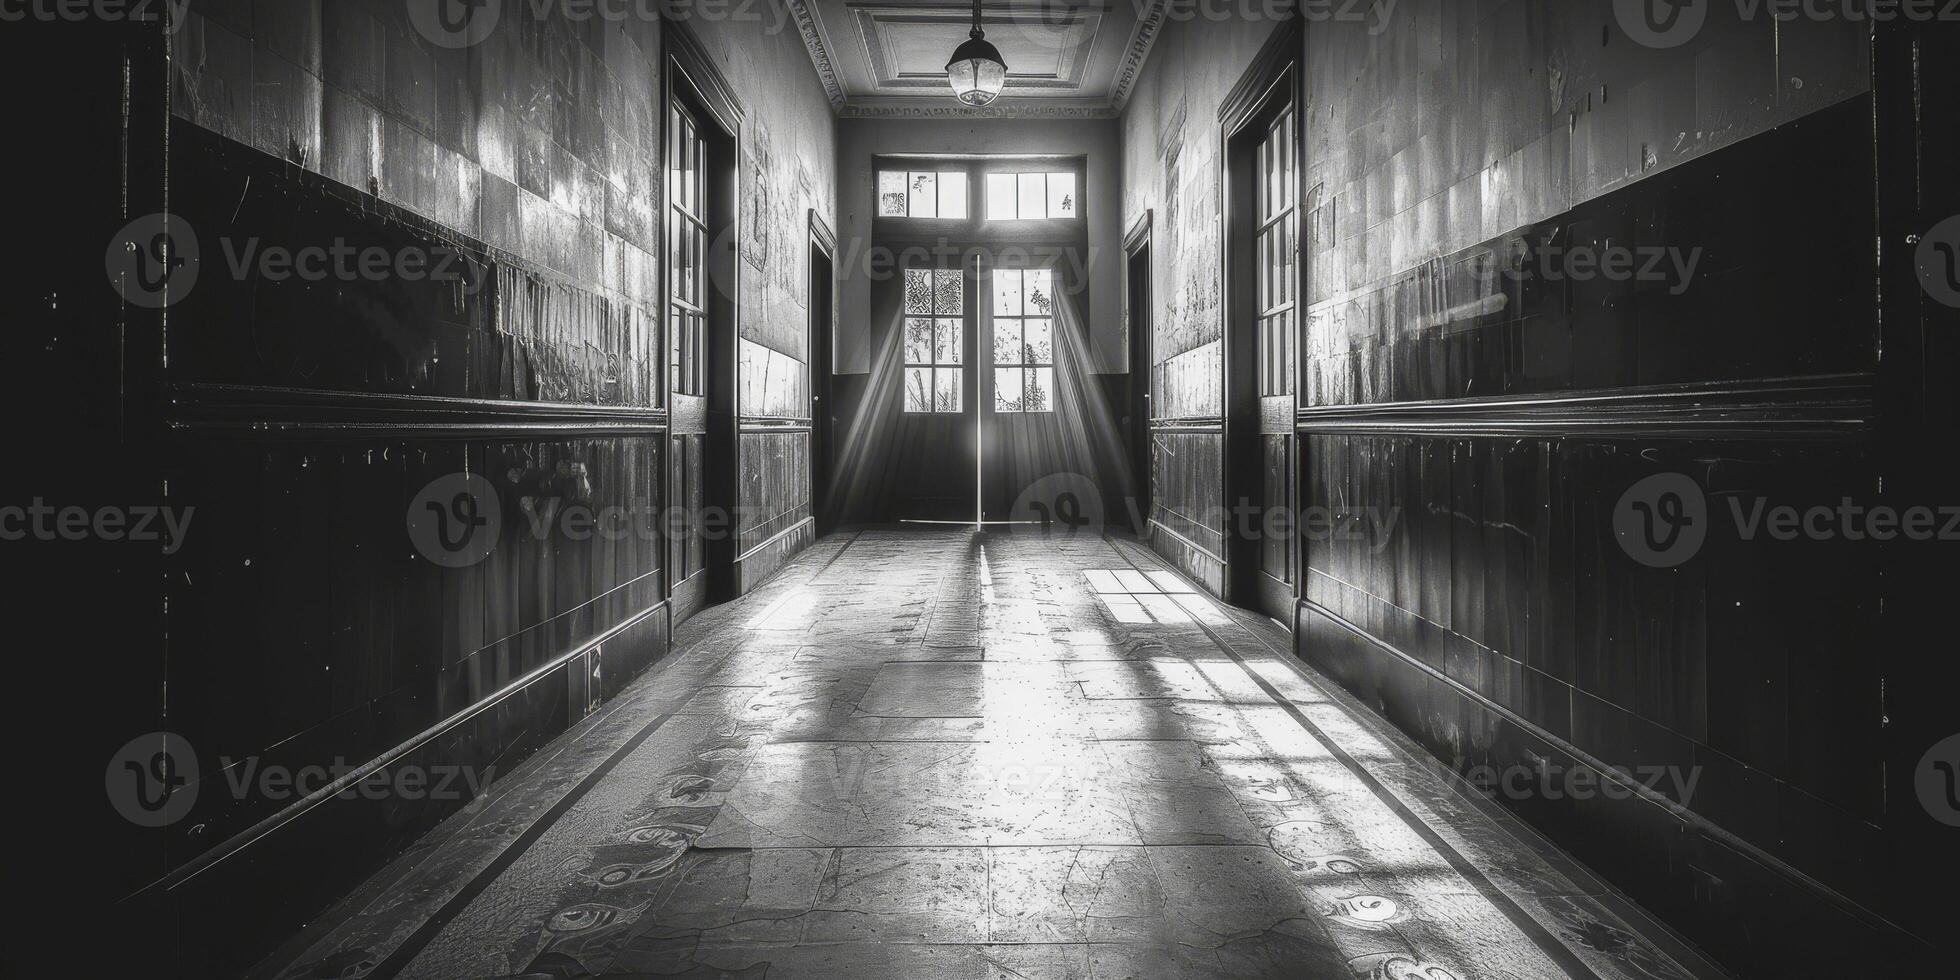 A hauntingly empty hallway bathed in light and shadow, captured in monochrome, evokes a timeless sense of mystery and abandonment photo